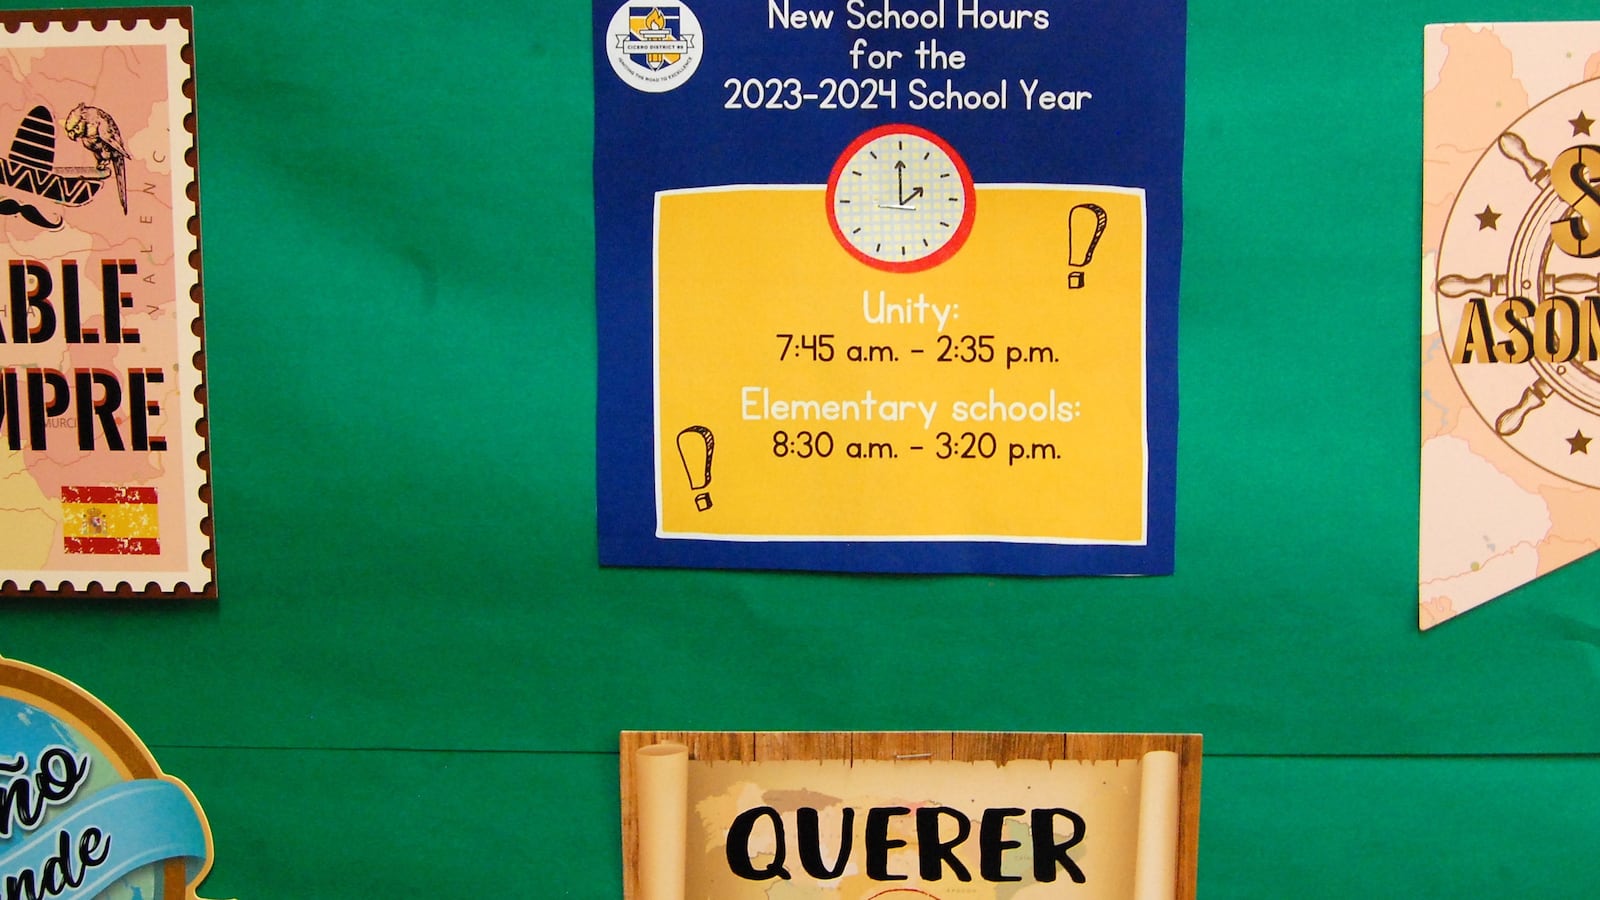 A sign on a green bulletin board indicates the new school hours for 2023.